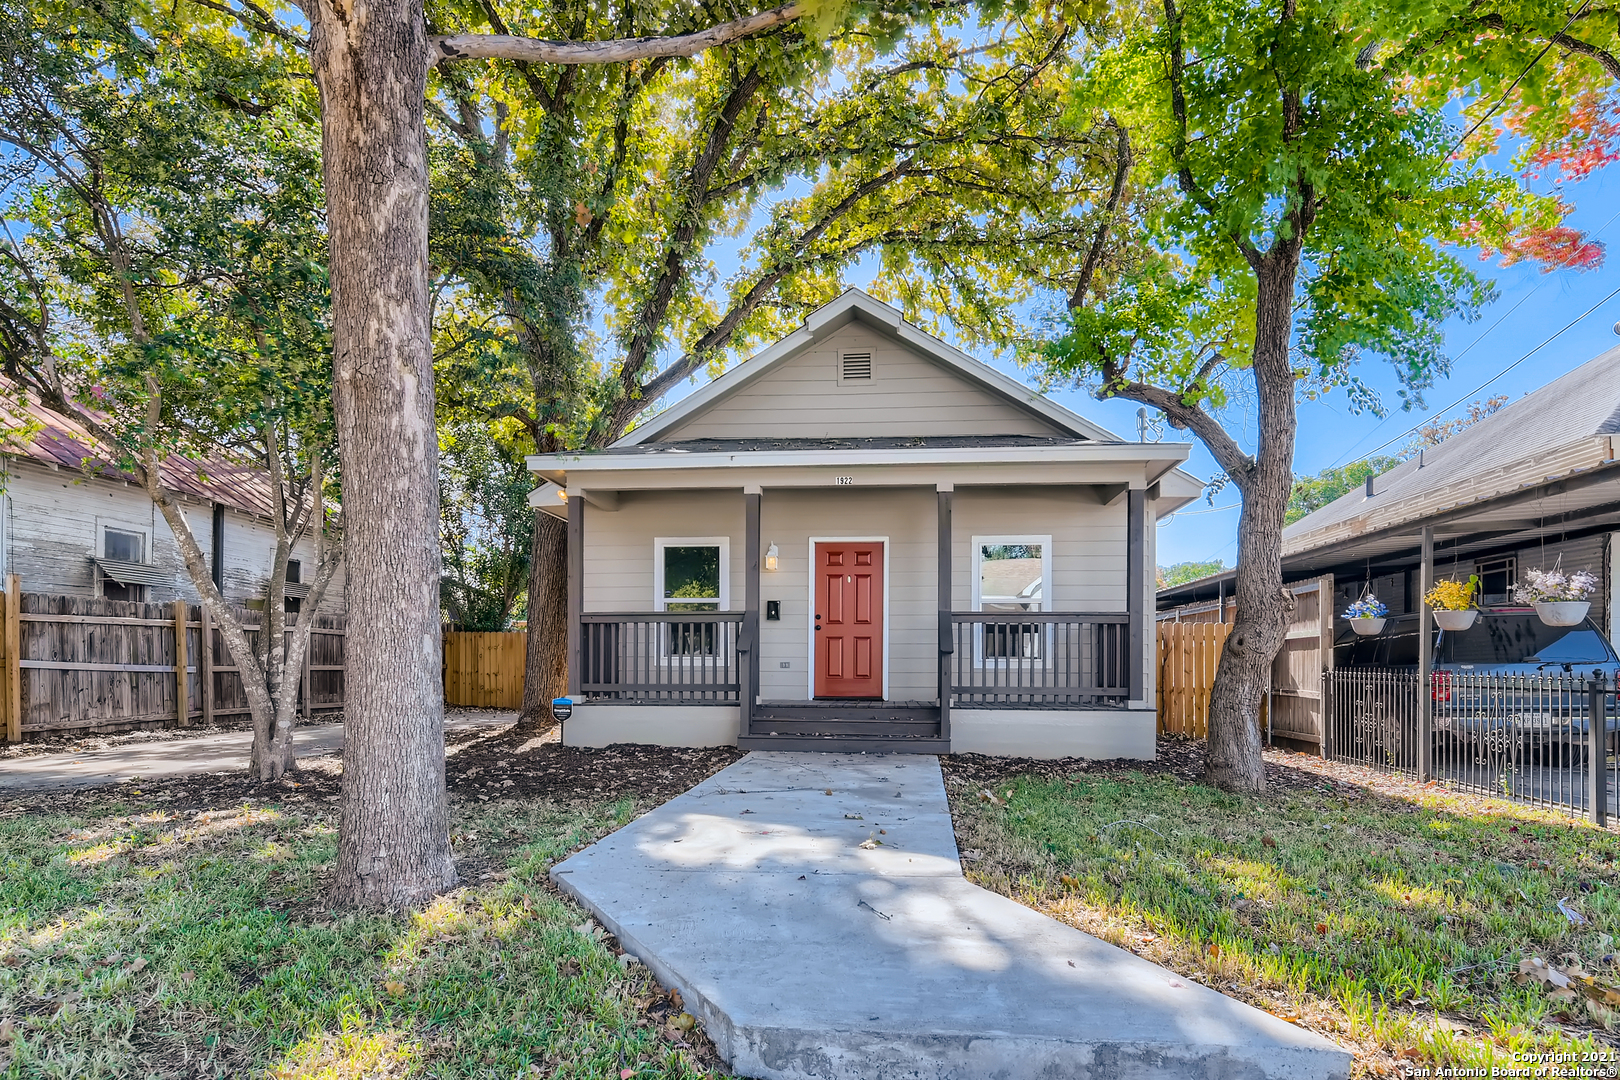 This beautifully remodeled home was stripped down to the foundation, engineered and rebuilt. Almost everything about this home is brand new! Enjoy walkability, craftsman style homes and all fun things downtown. Home has all the charm with a large covered front porch, modern finishes, luxury vinyl plank floors, granite counters & shaker cabinets. Large back yard, pecan trees & a new fence. San Antonio's fastest growing areas is Denver Heights, only a 5 minute drive to the popular Pearl, SA's Tech sector, downtown and the famous River Walk.